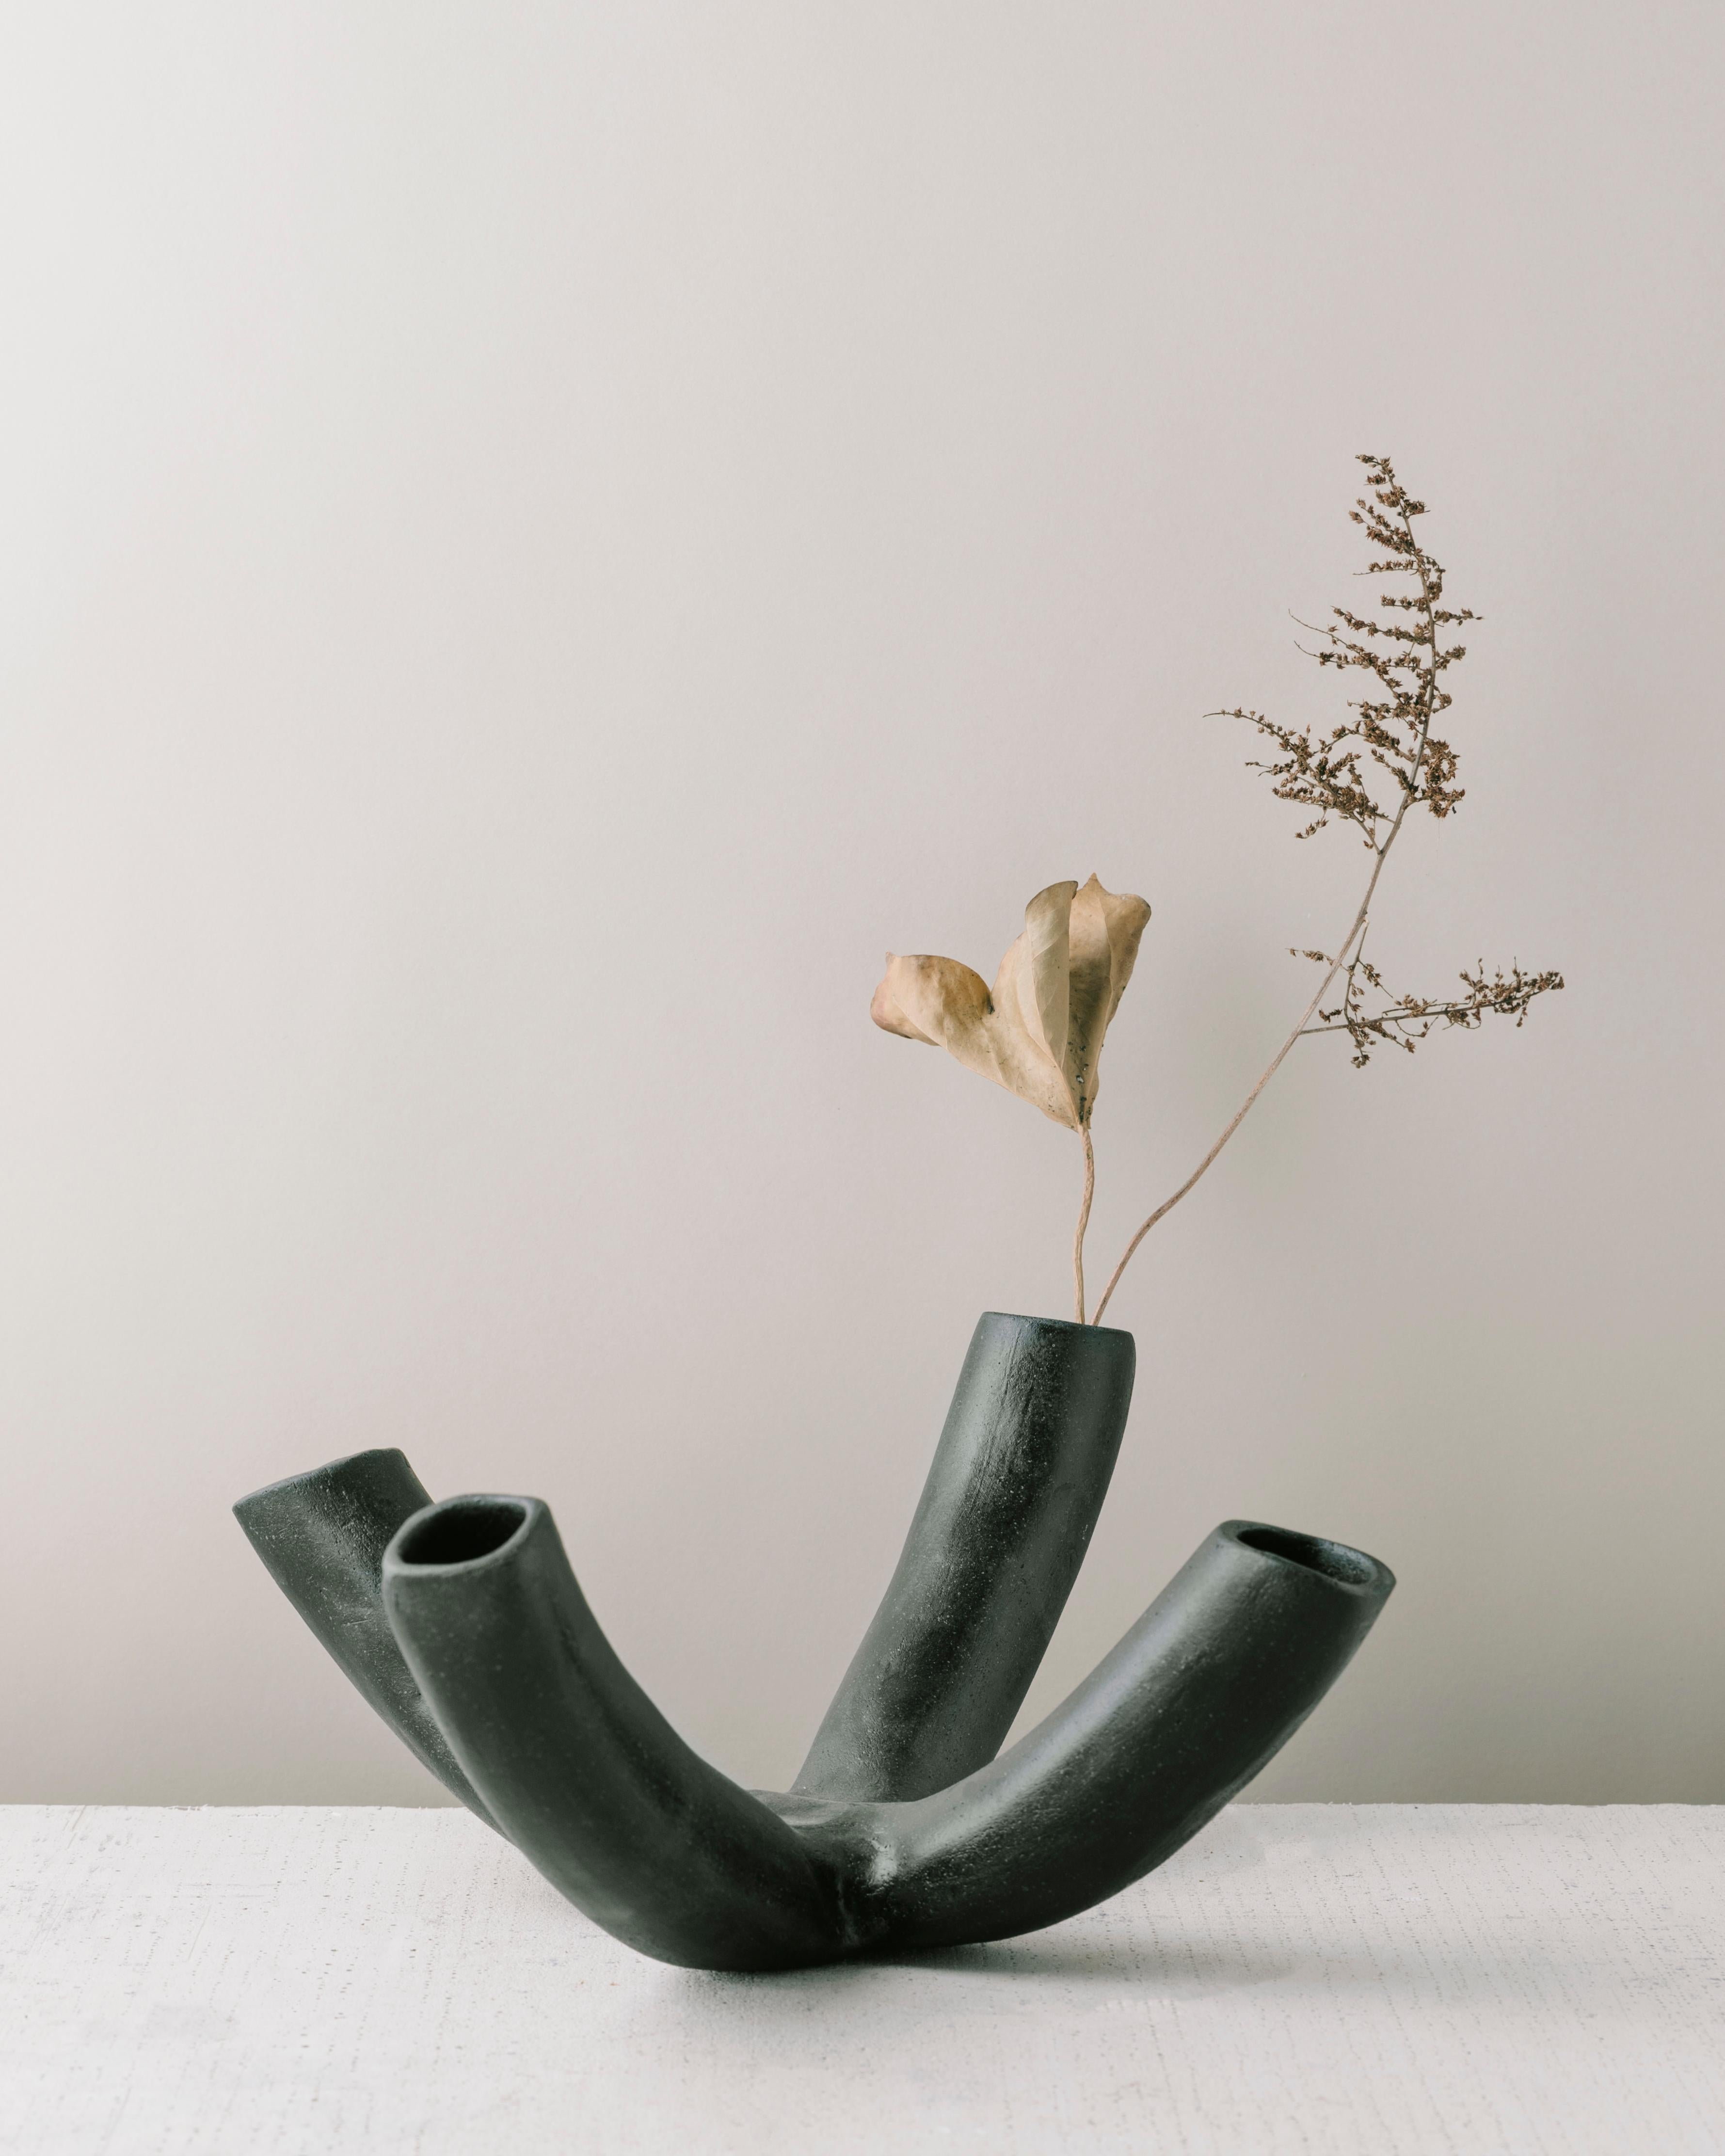 Our 4-way Venule is inspired by the small blood vessels in the human body that come together to keep us alive and well. Perfect as stand-alone art objects or as a home to flowers, dried or alive.